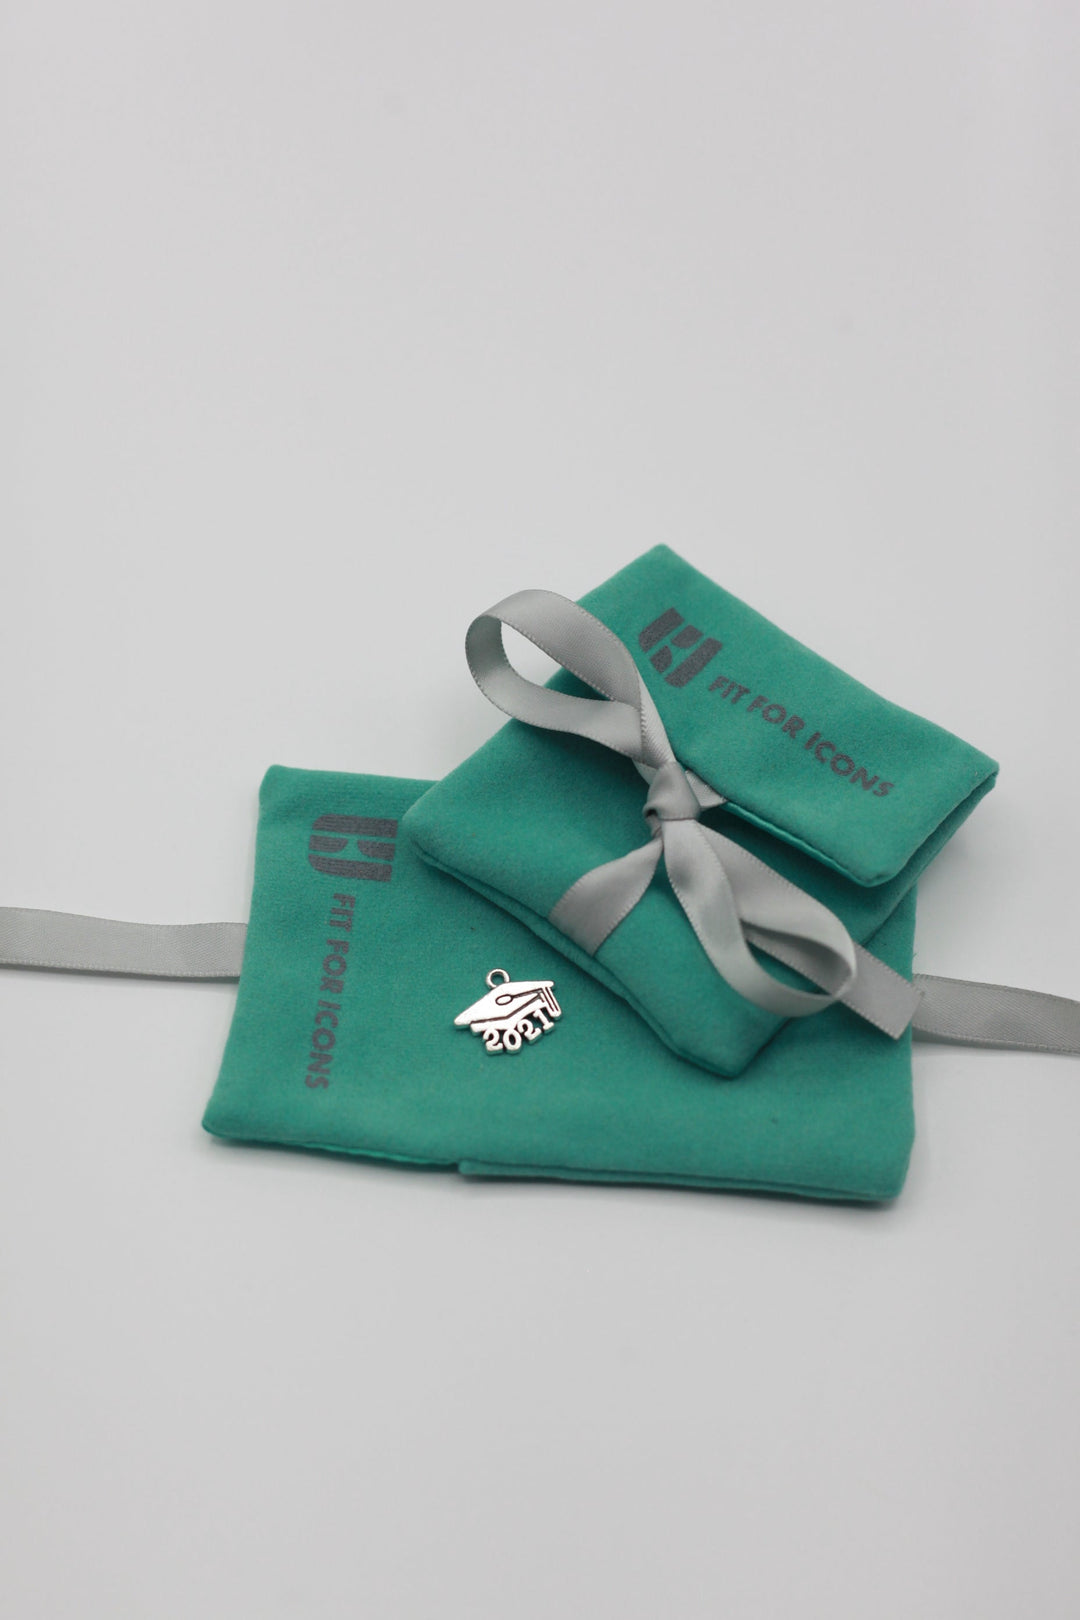 Graduate Gift Set - Graduation Gift Set - Fit For Icons